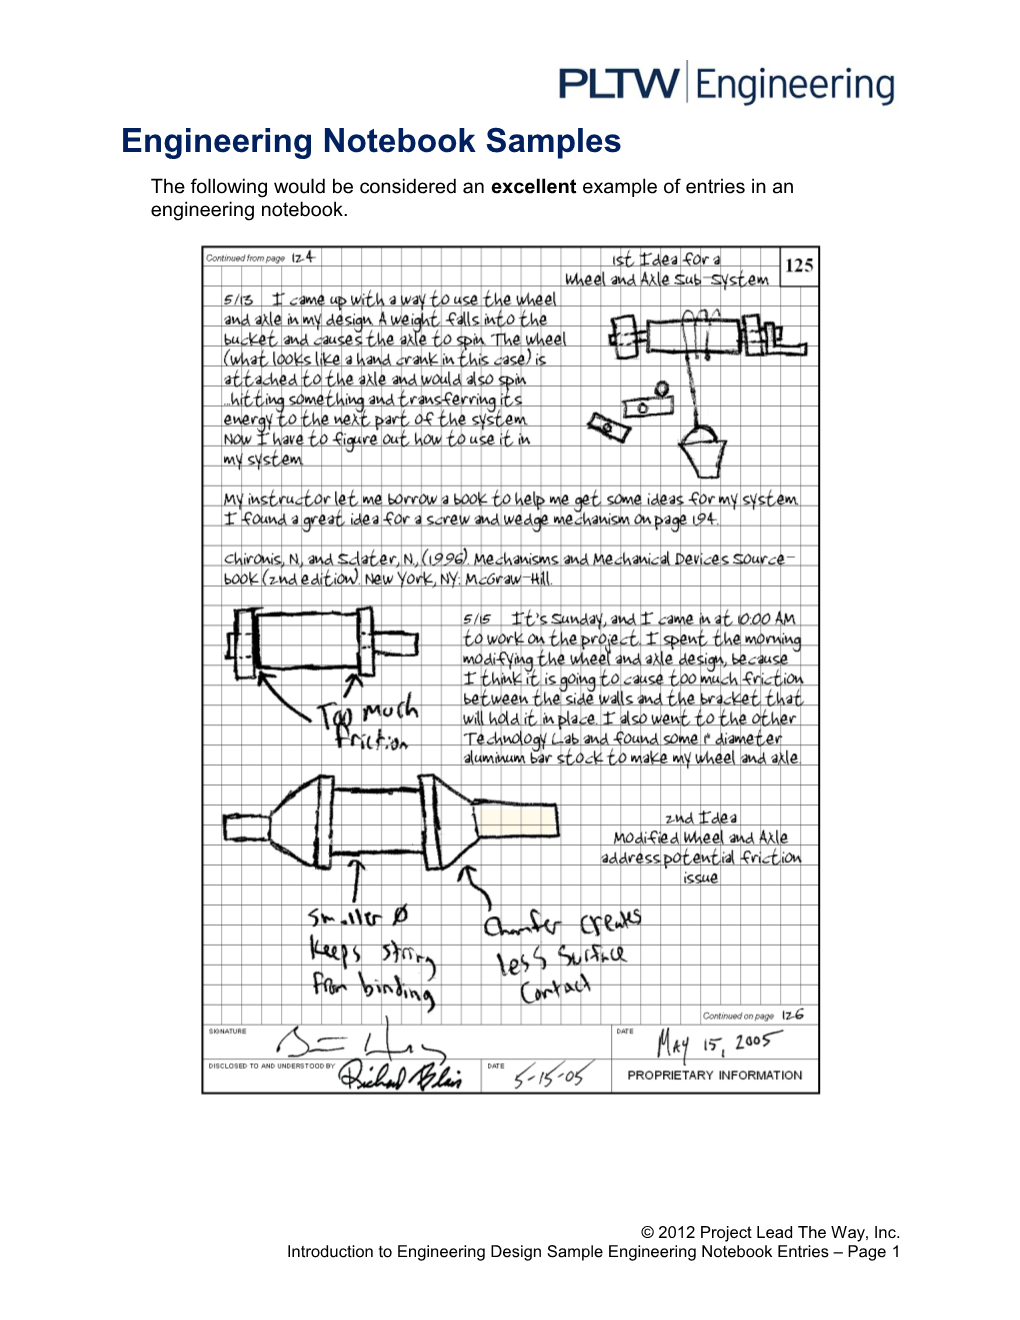 Lesson 1.3 Sample Engineeing Notebook Entries